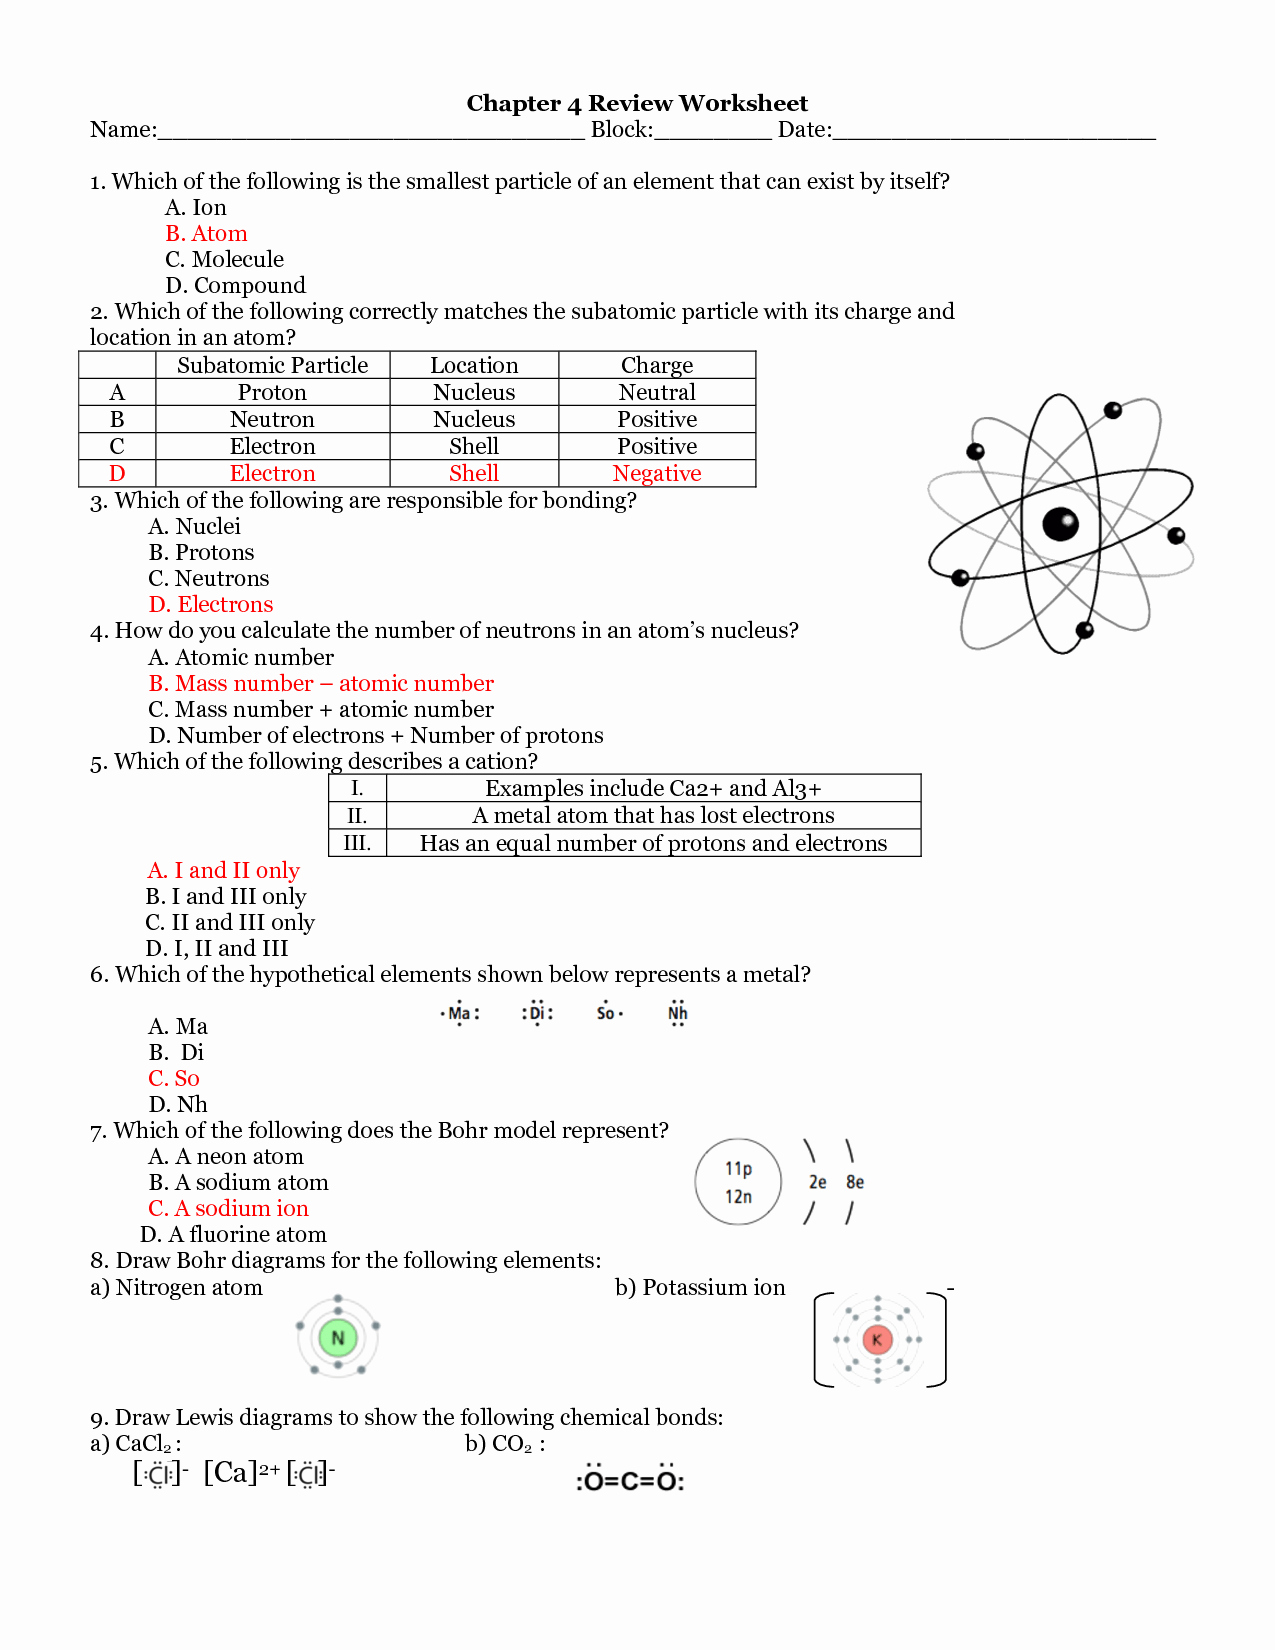 Atoms and Ions Worksheet Answers Luxury atomic Structure History Worksheet